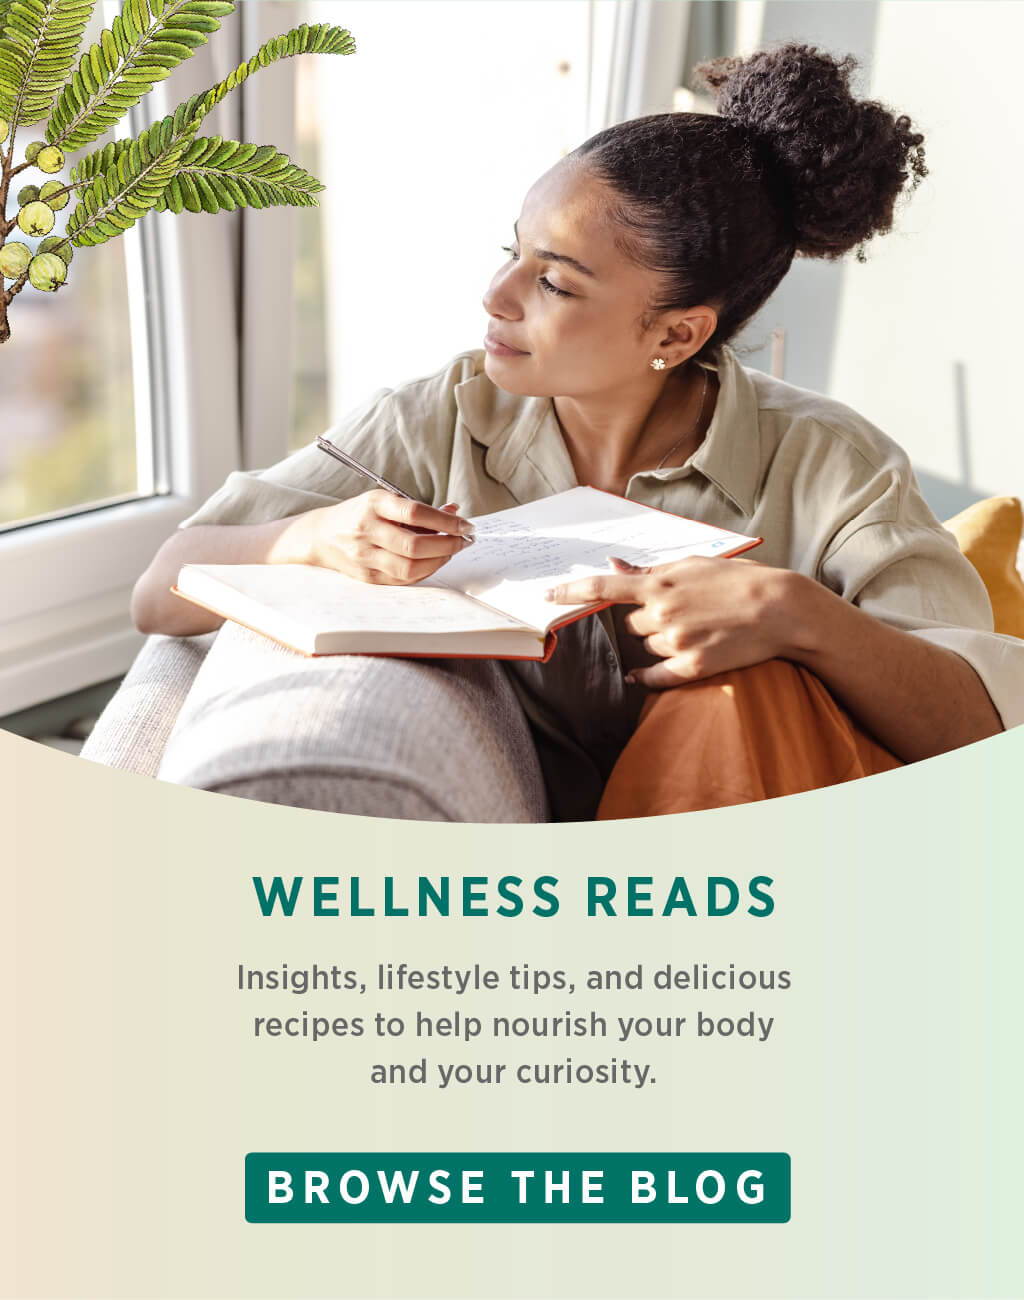 Wellness Reads: Insights, lifestyle tips, and delicious recipes to help nourish your body and your curiosity. Browse the blog.